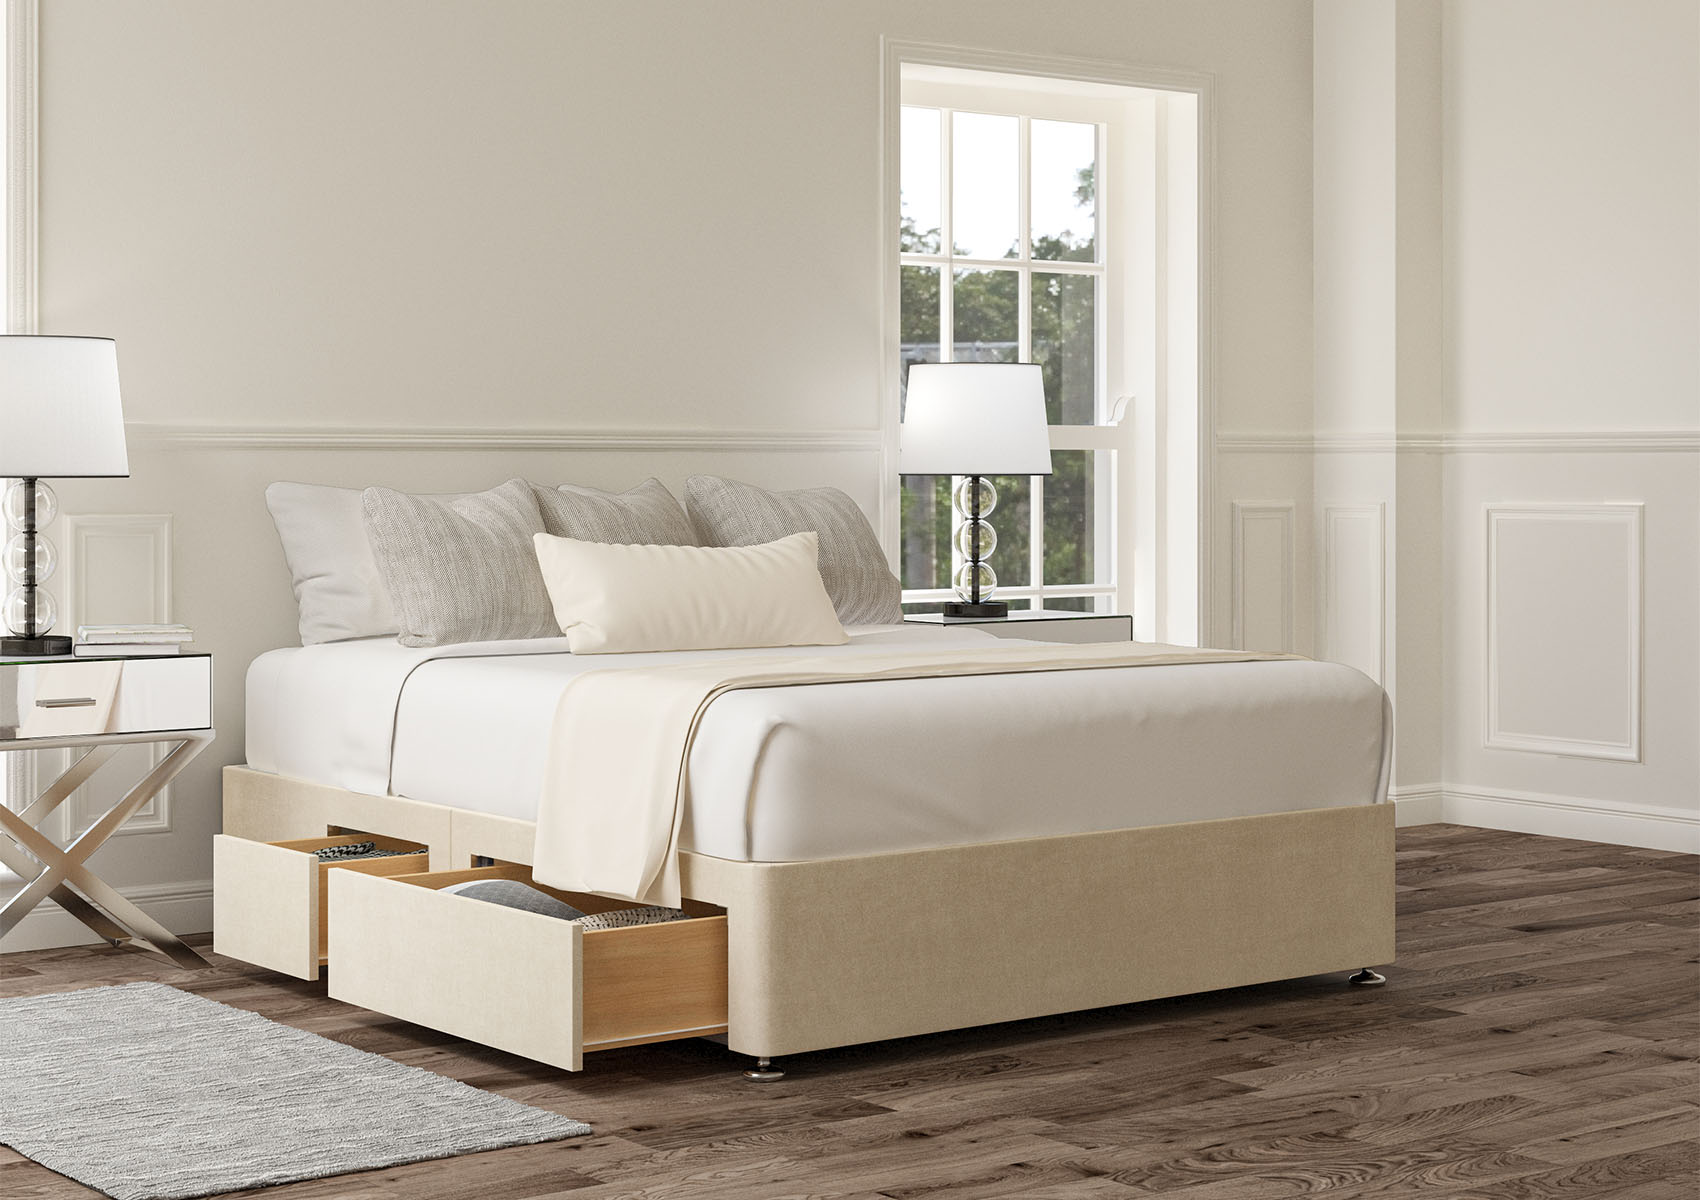 View 22 Naples Cream Upholstered King Size Storage Bed Time4Sleep information